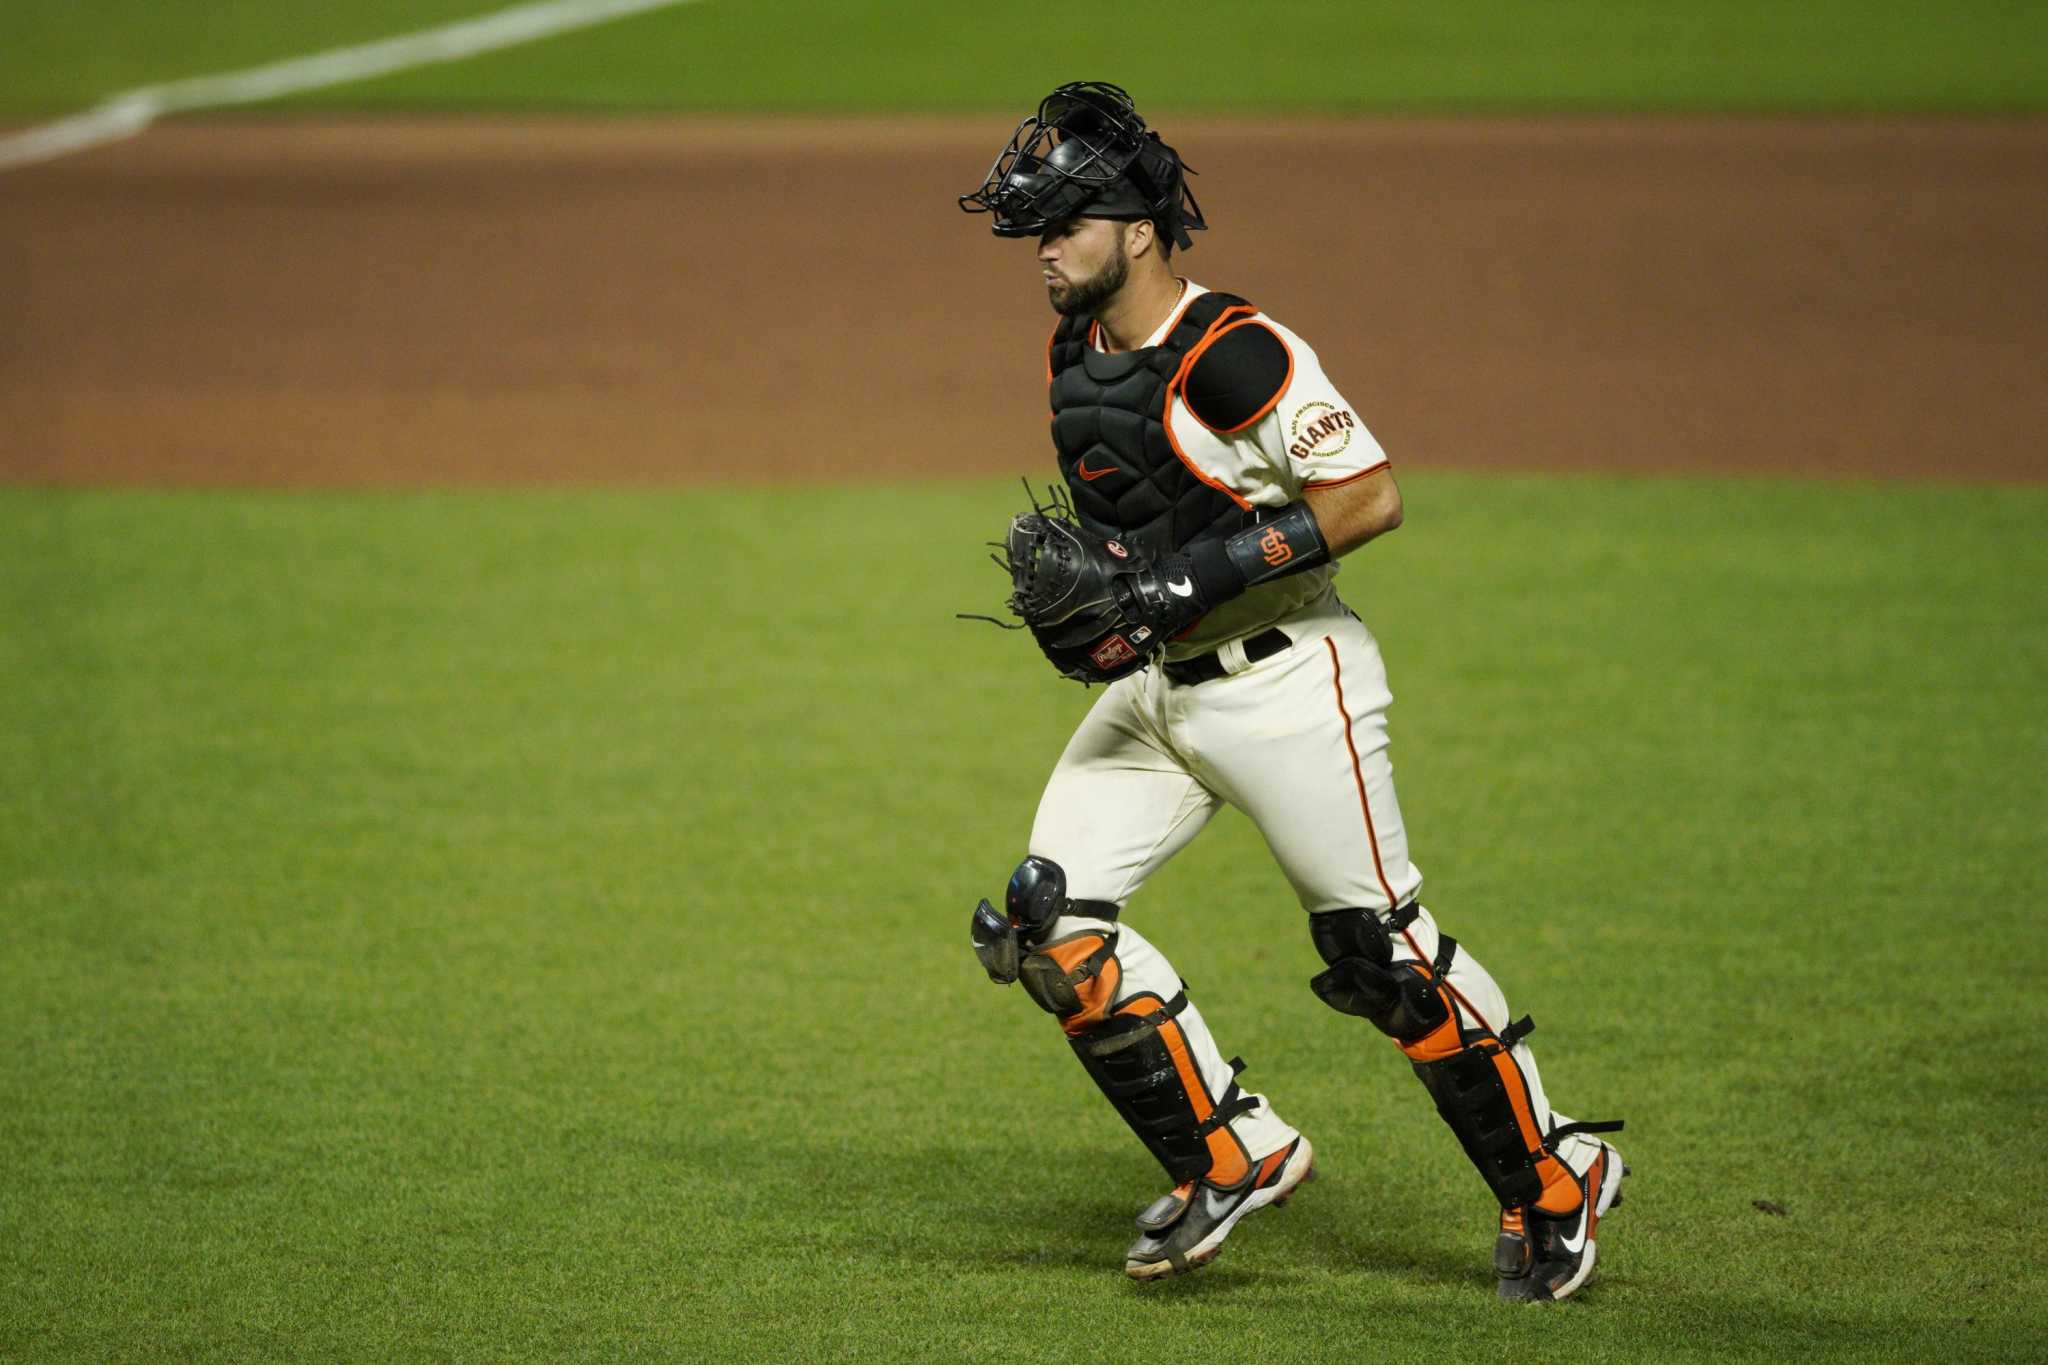 I can be the guy': Giants catcher Joey Bart ready to succeed Buster Posey